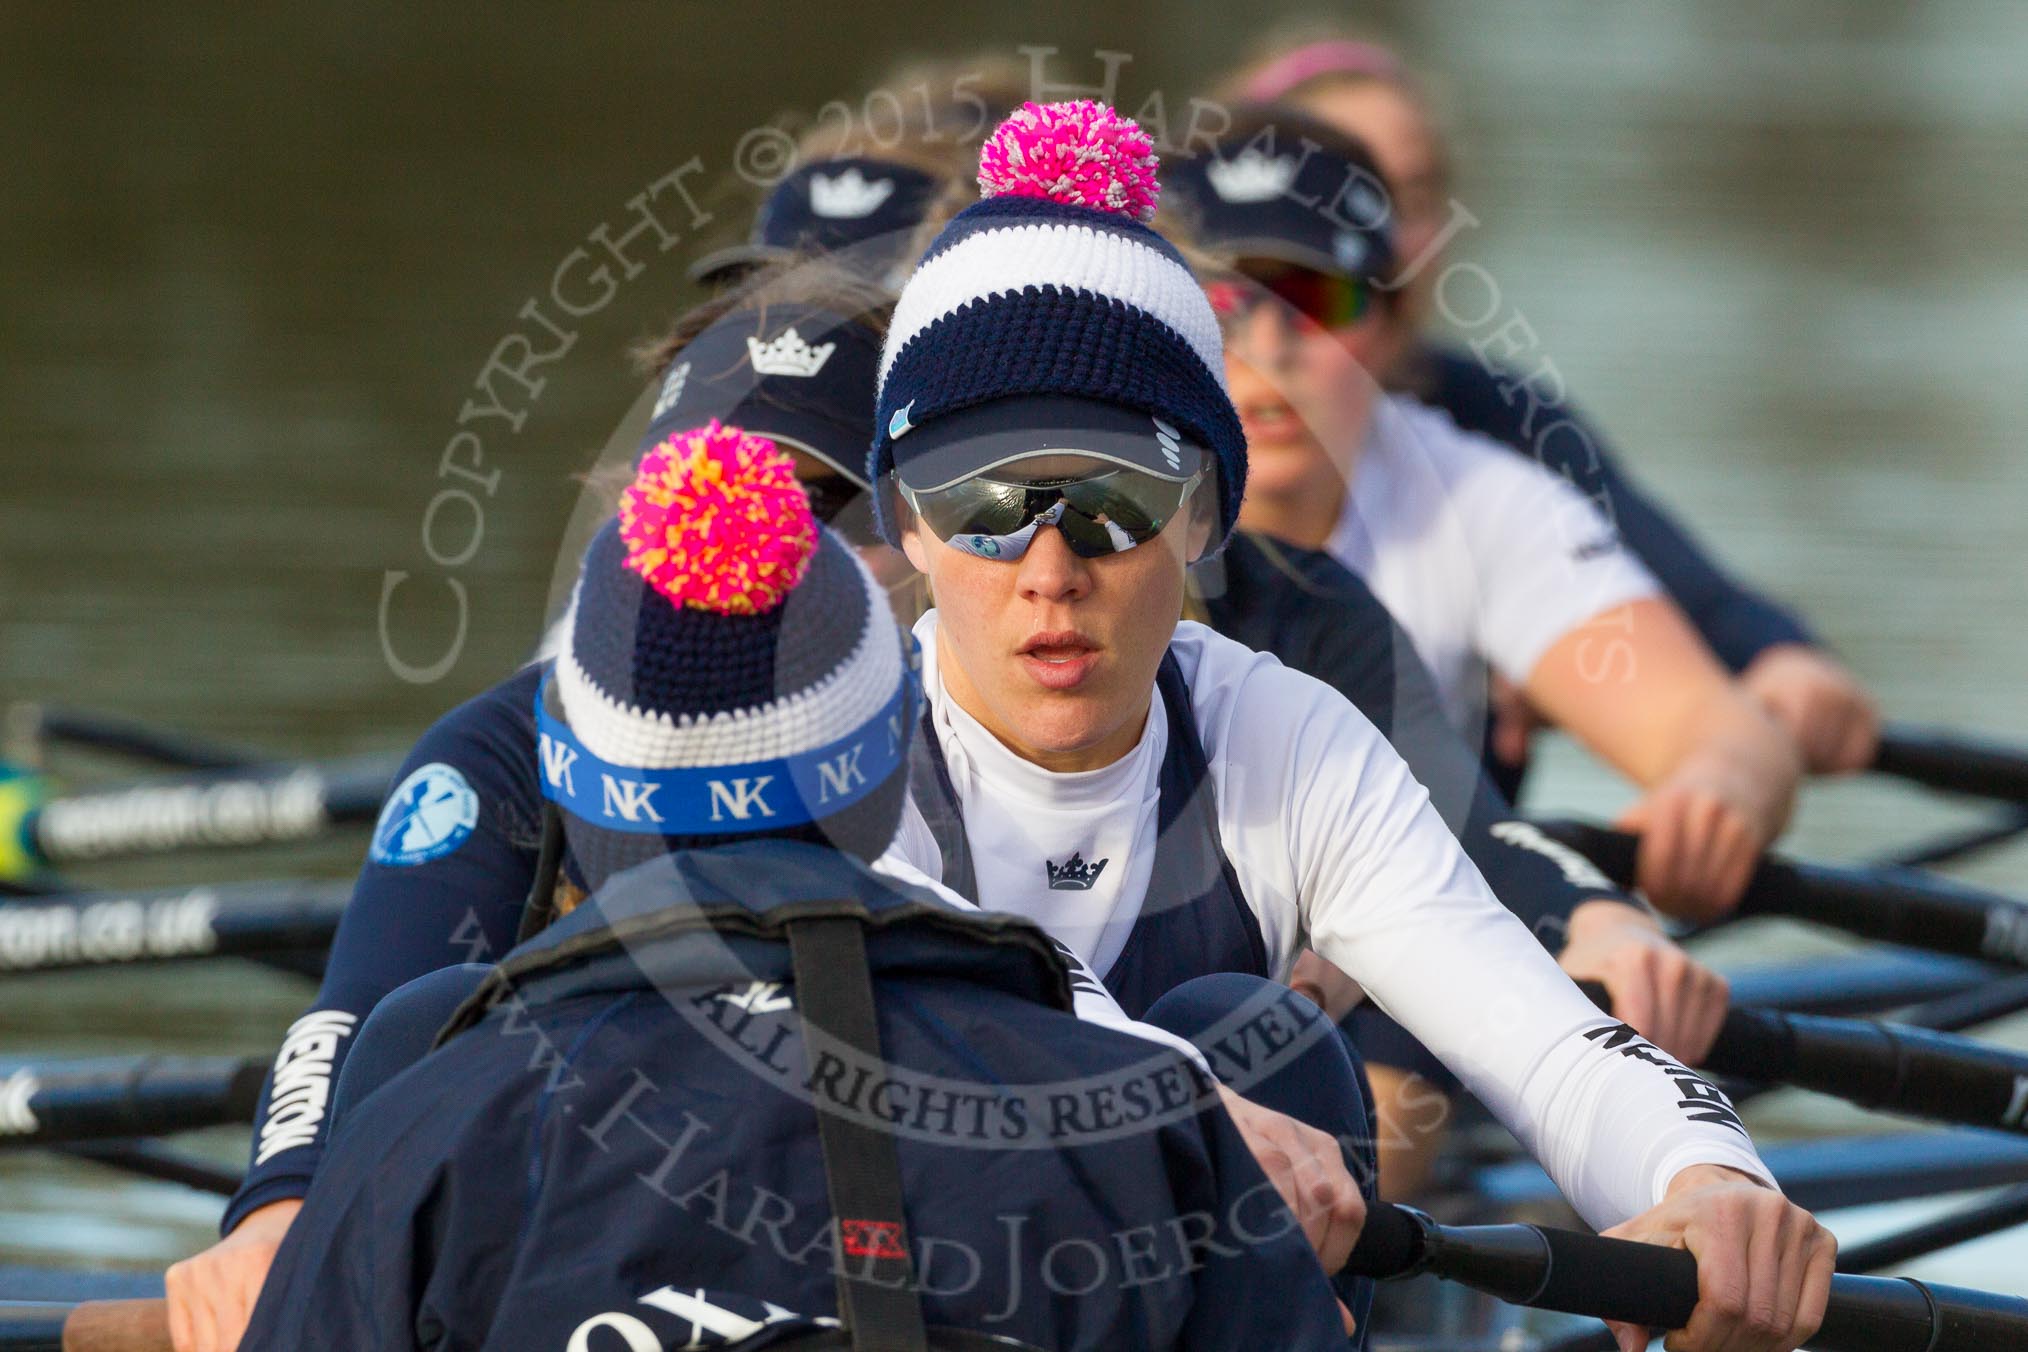 The Boat Race season 2015: OUWBC training Wallingford.

Wallingford,

United Kingdom,
on 04 March 2015 at 15:59, image #139